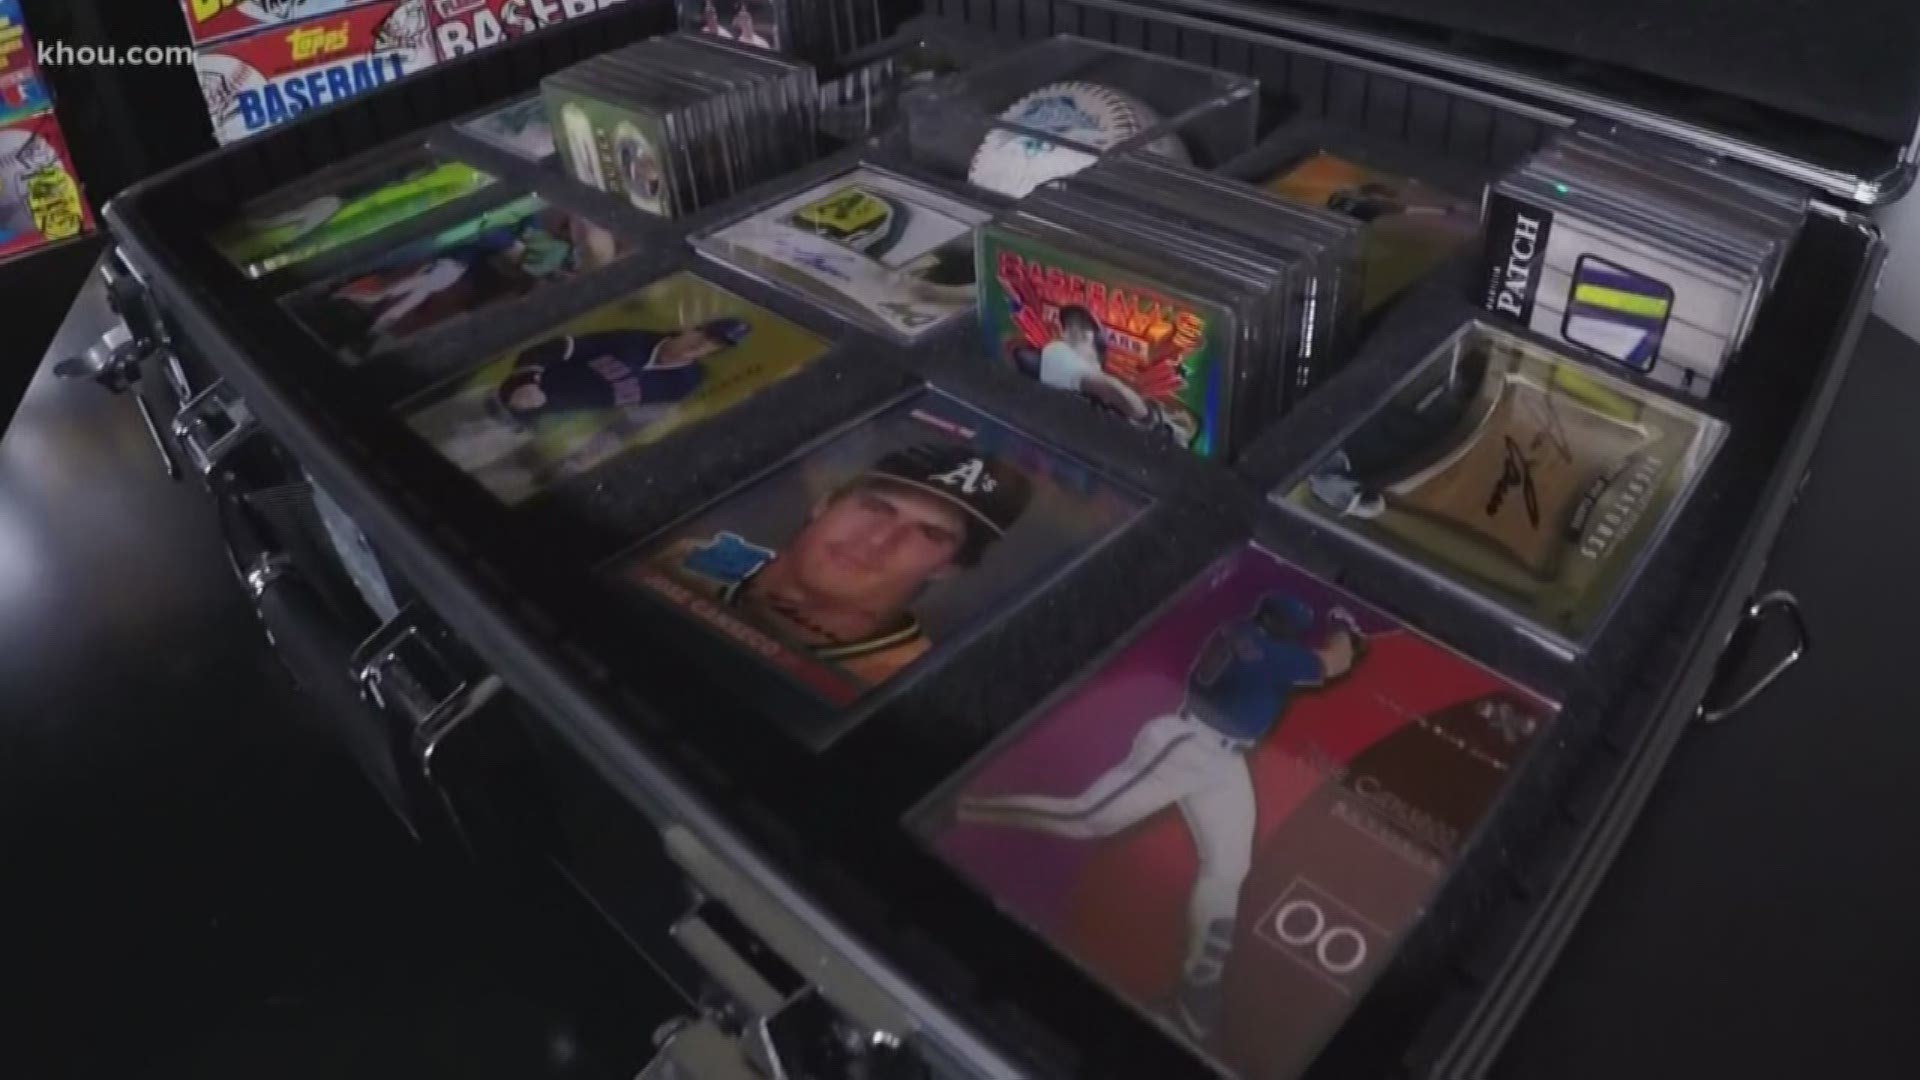 A Tomball man who collected more than 5,000 Jose Canseco cards chronicles his hobby in a new book.